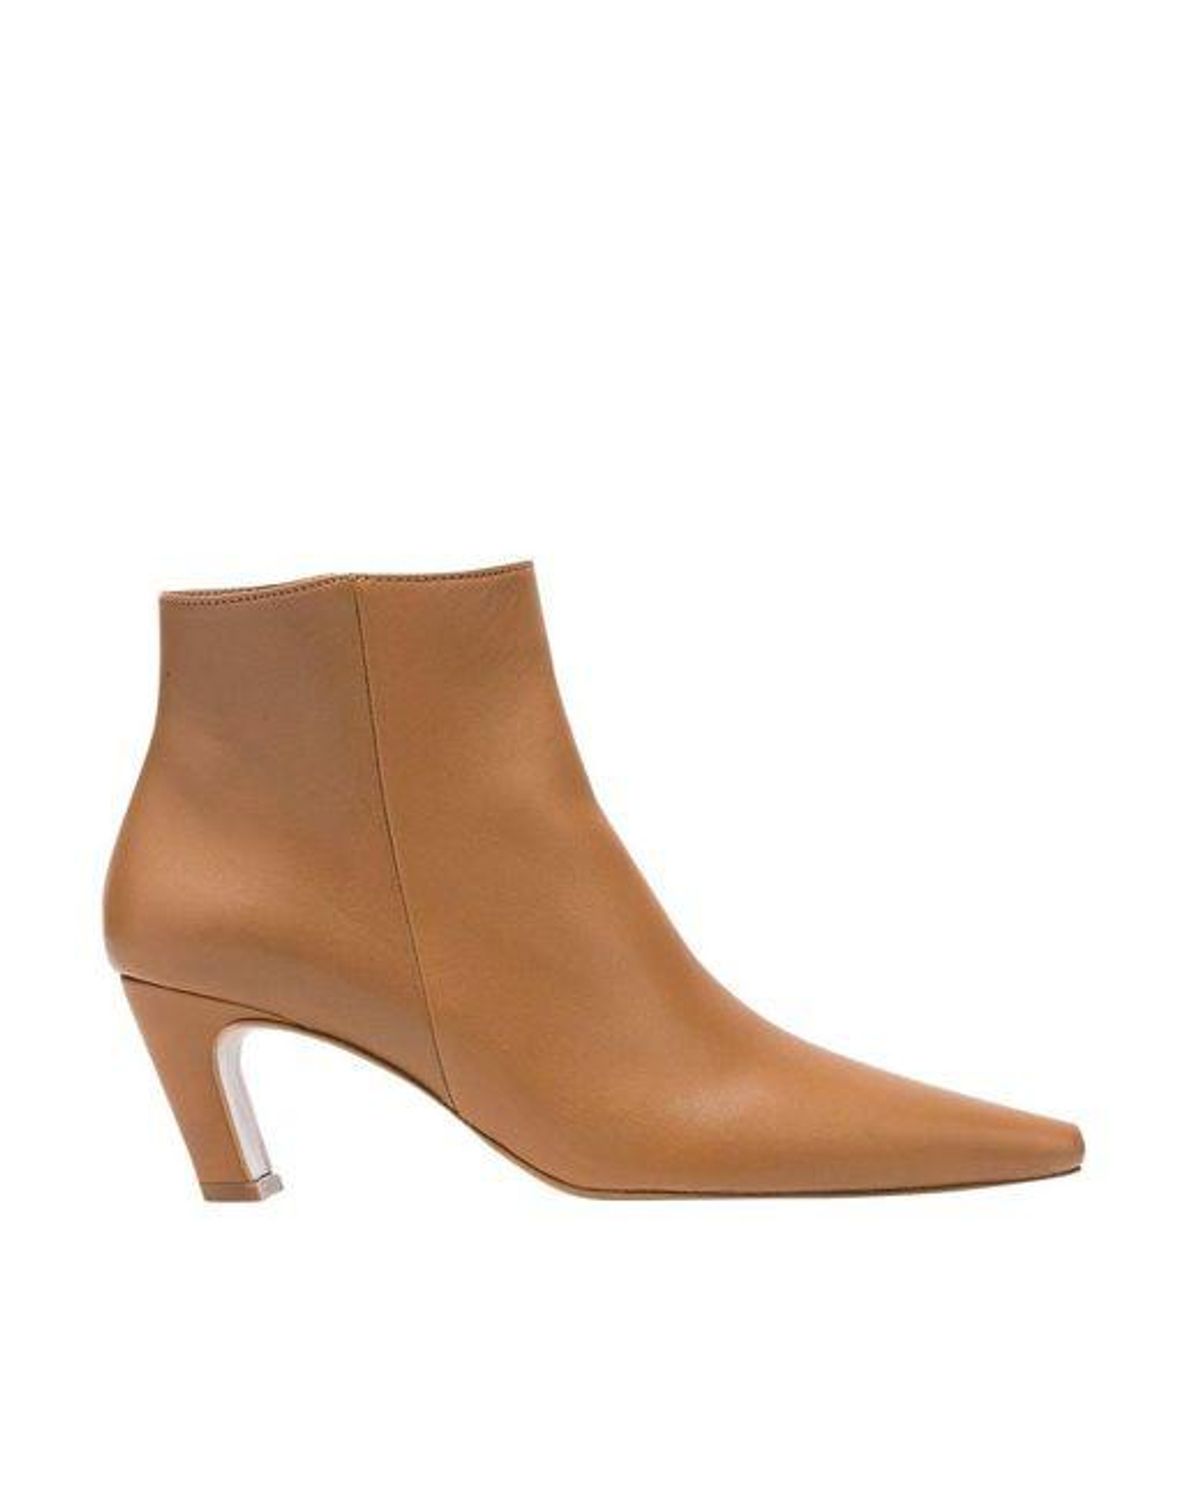 Xenia Leather Cognac Boots